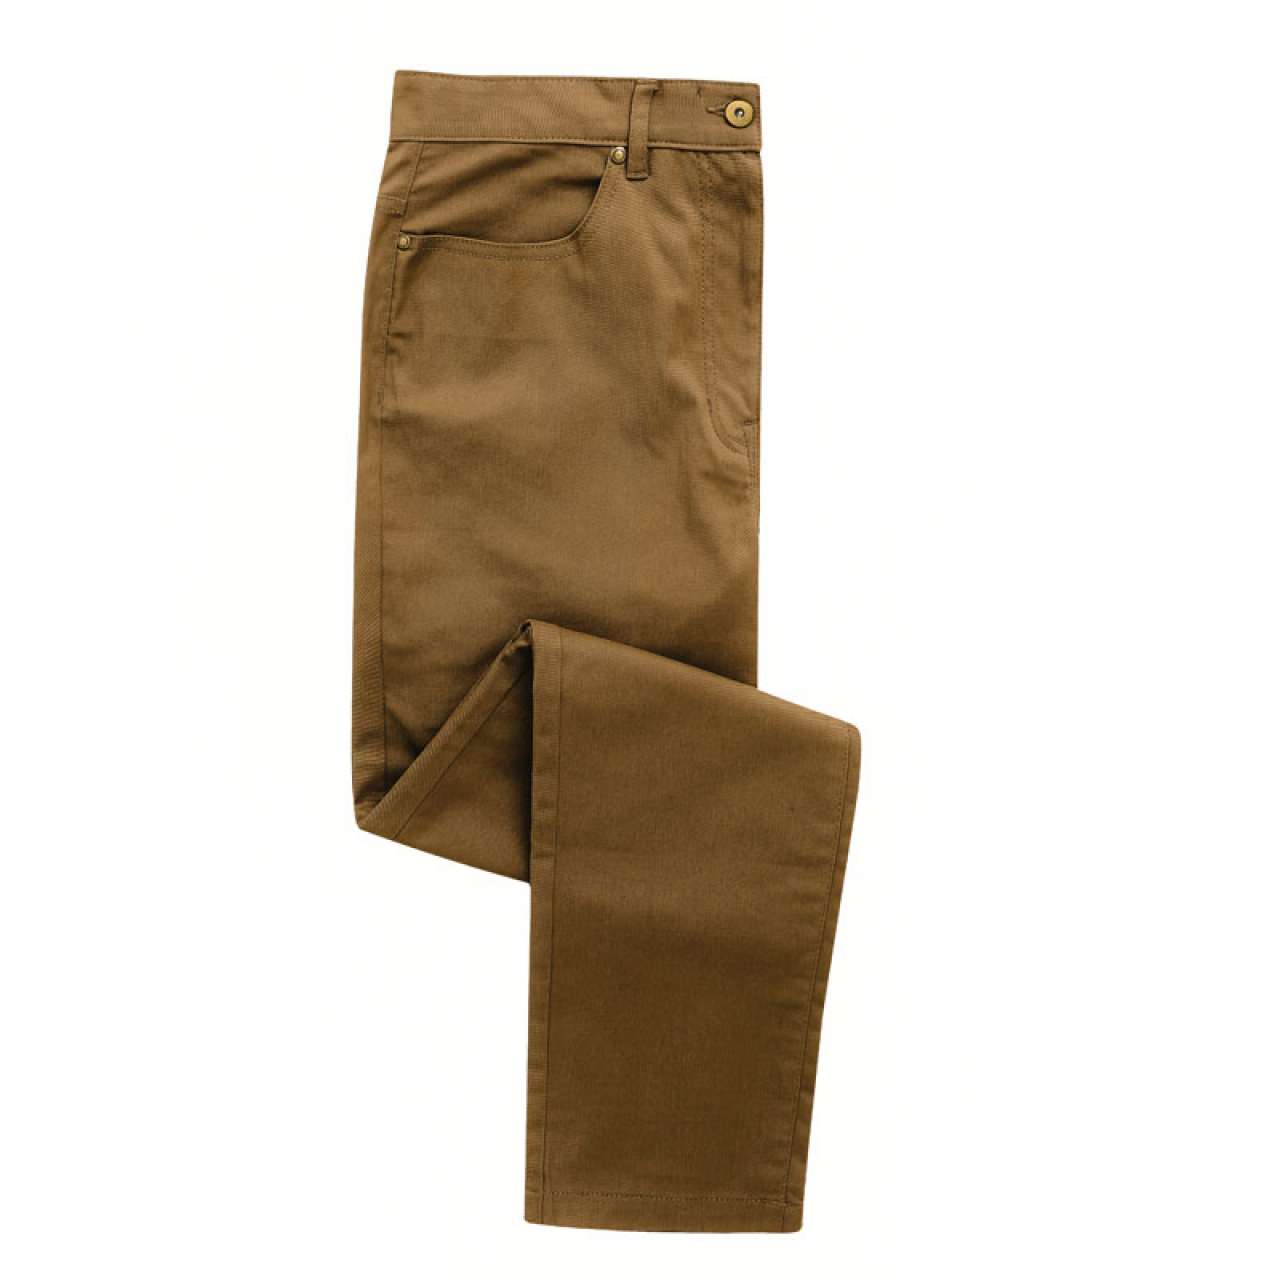 MEN'S PERFORMANCE CHINO JEANS